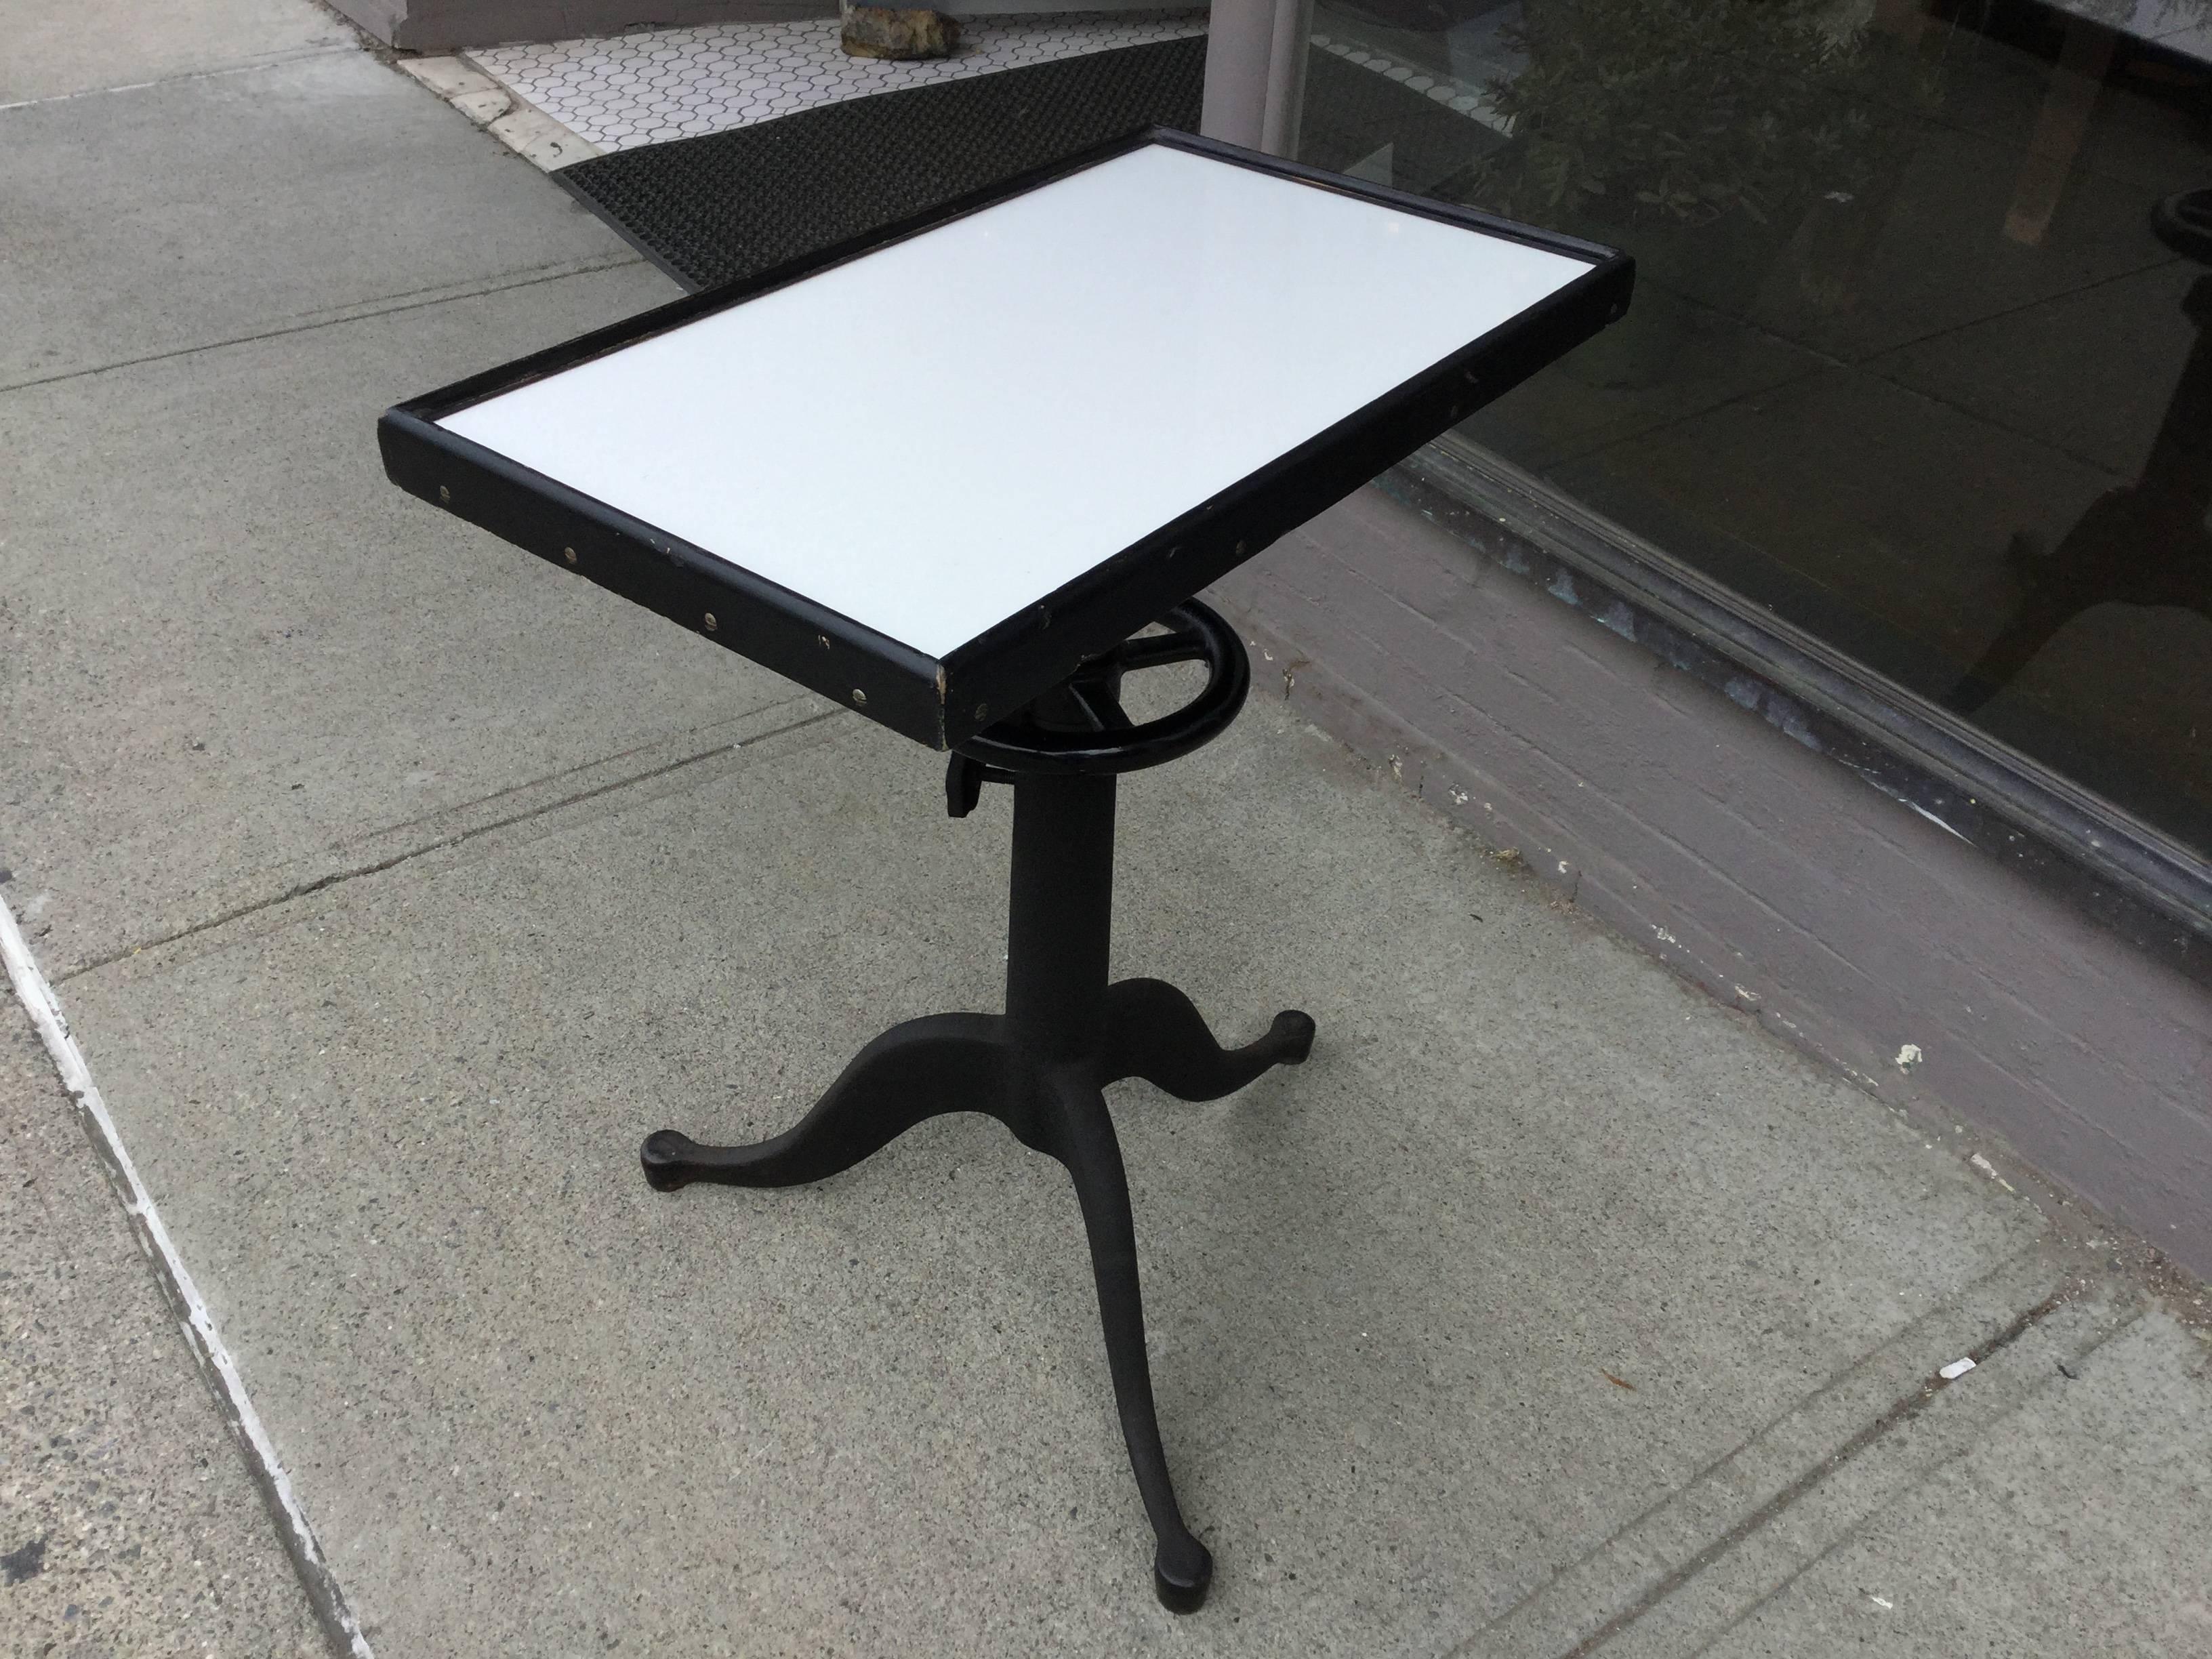 Industrial optometrist adjustable table. Made by Bausch and Lomb. All original almost pristine condition paint and milk glass surface.